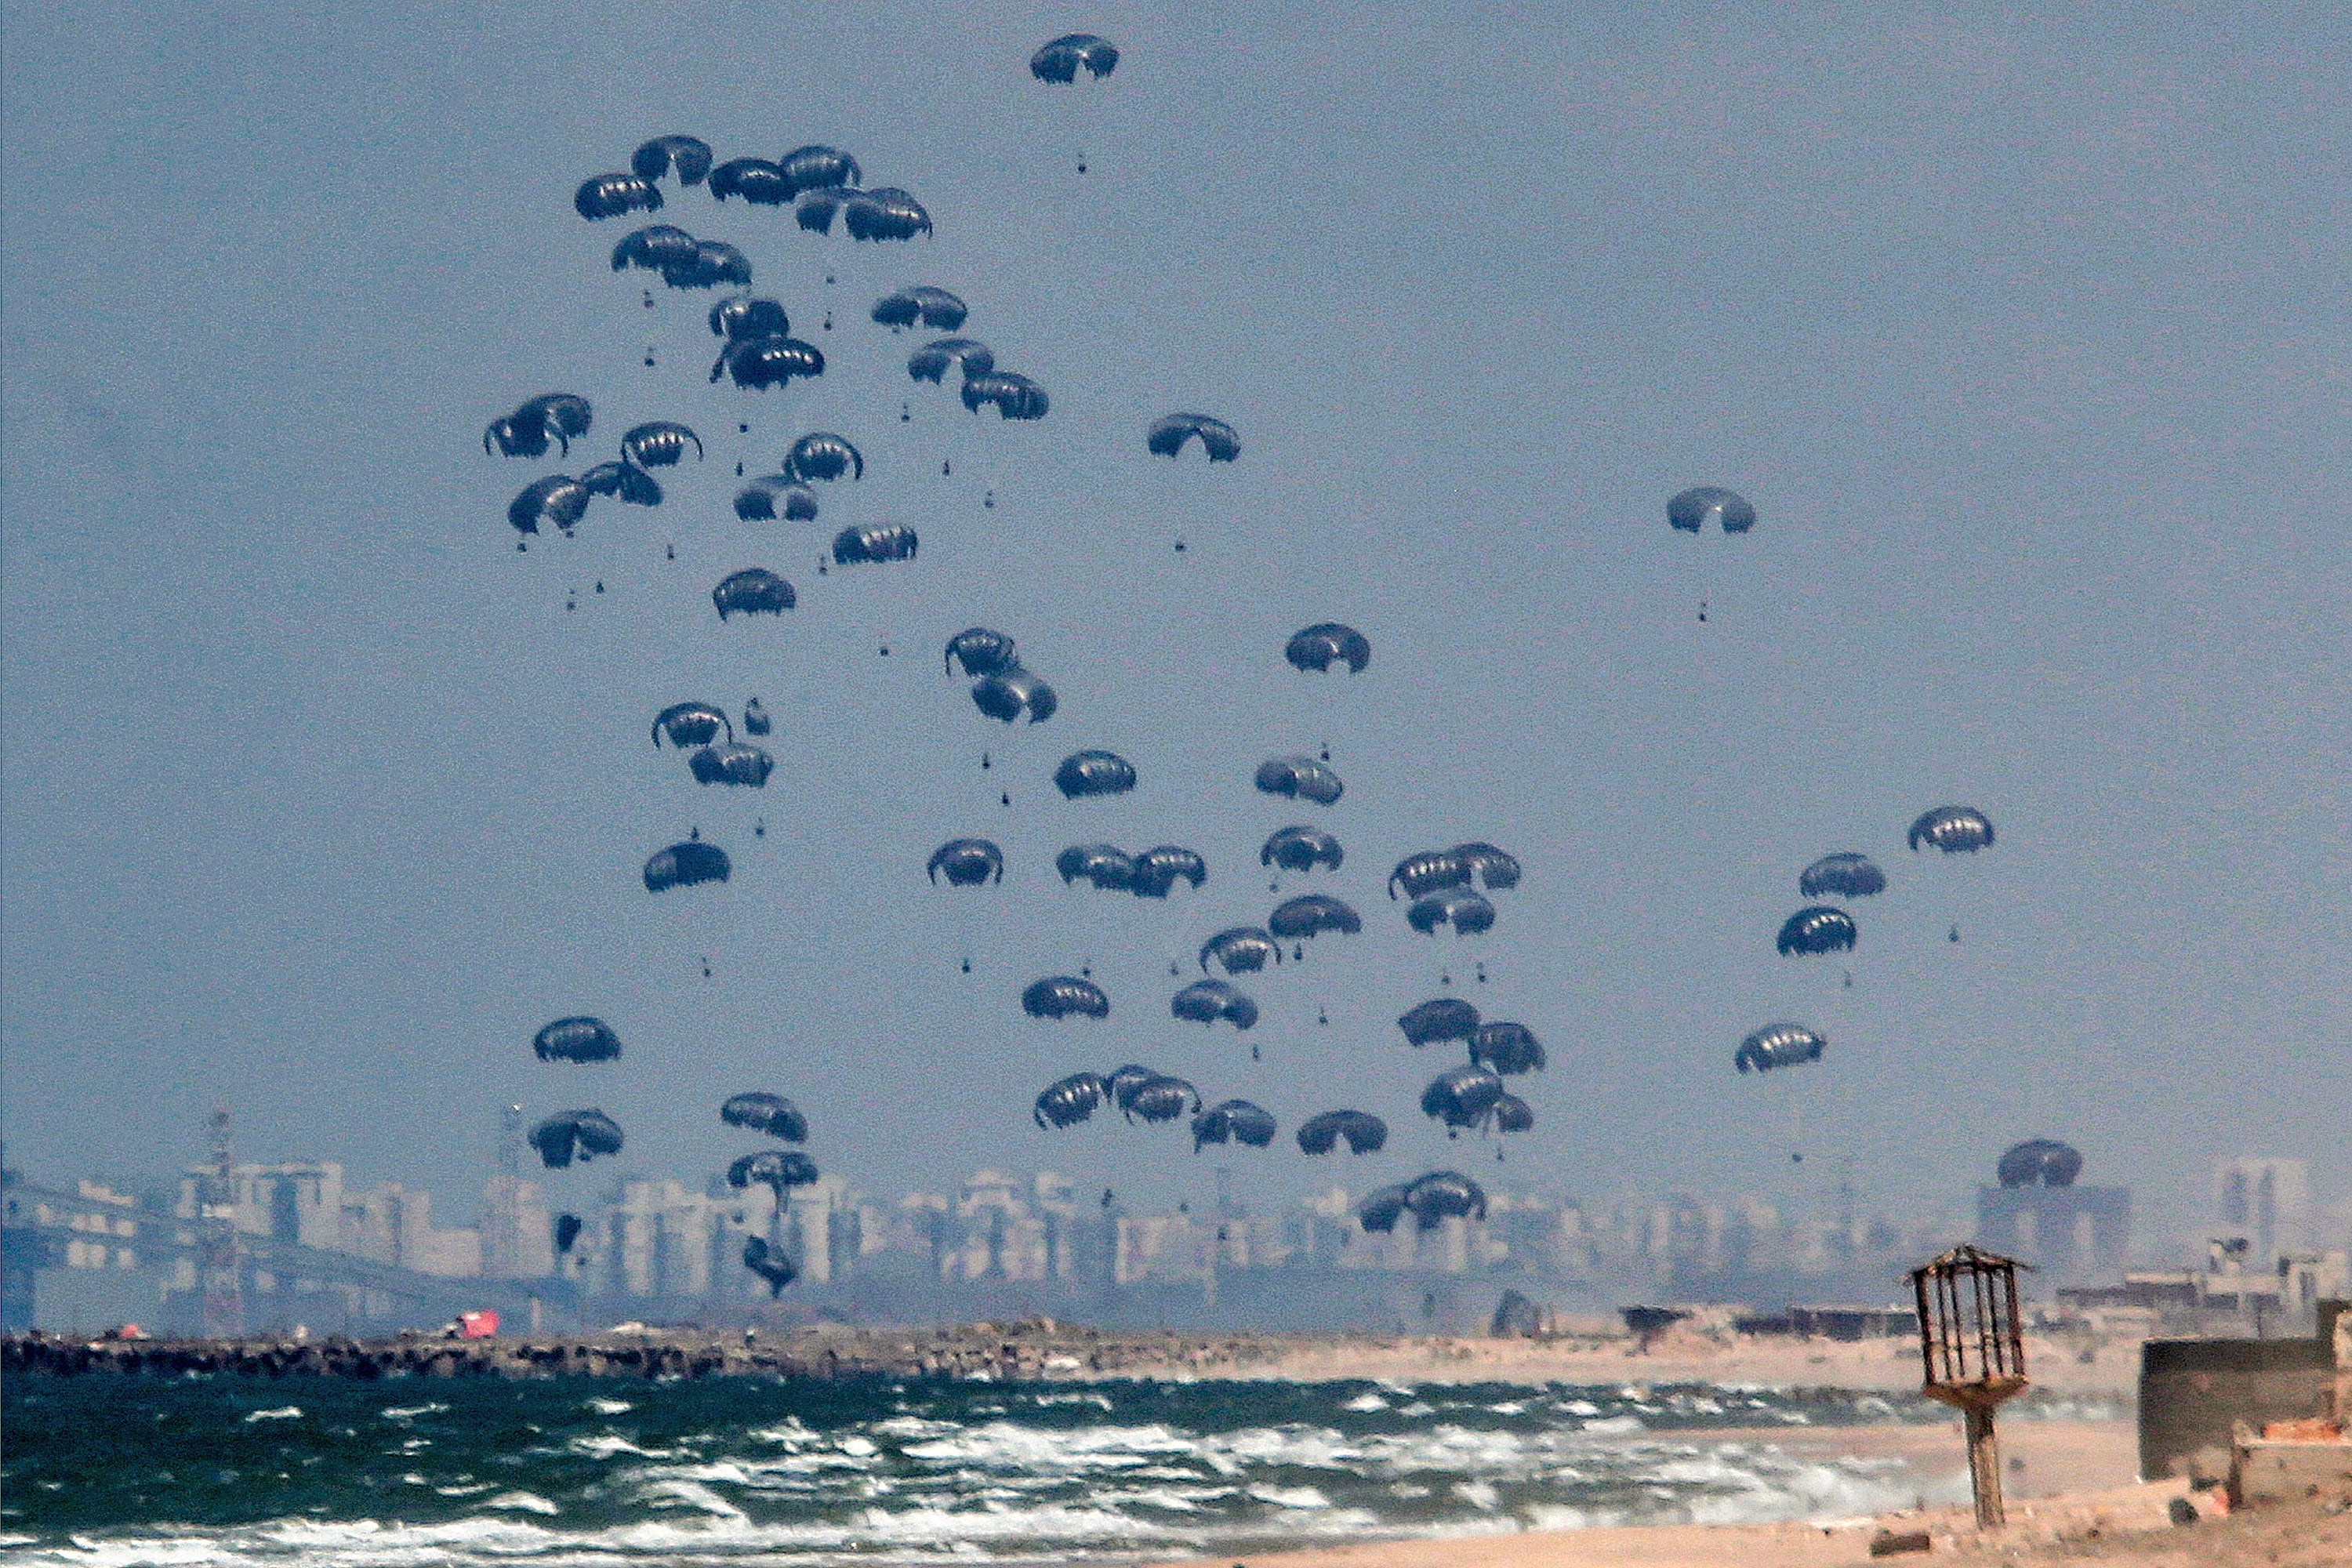 Humanitarian aid is dropped on the Gaza Strip, west of Gaza Cit